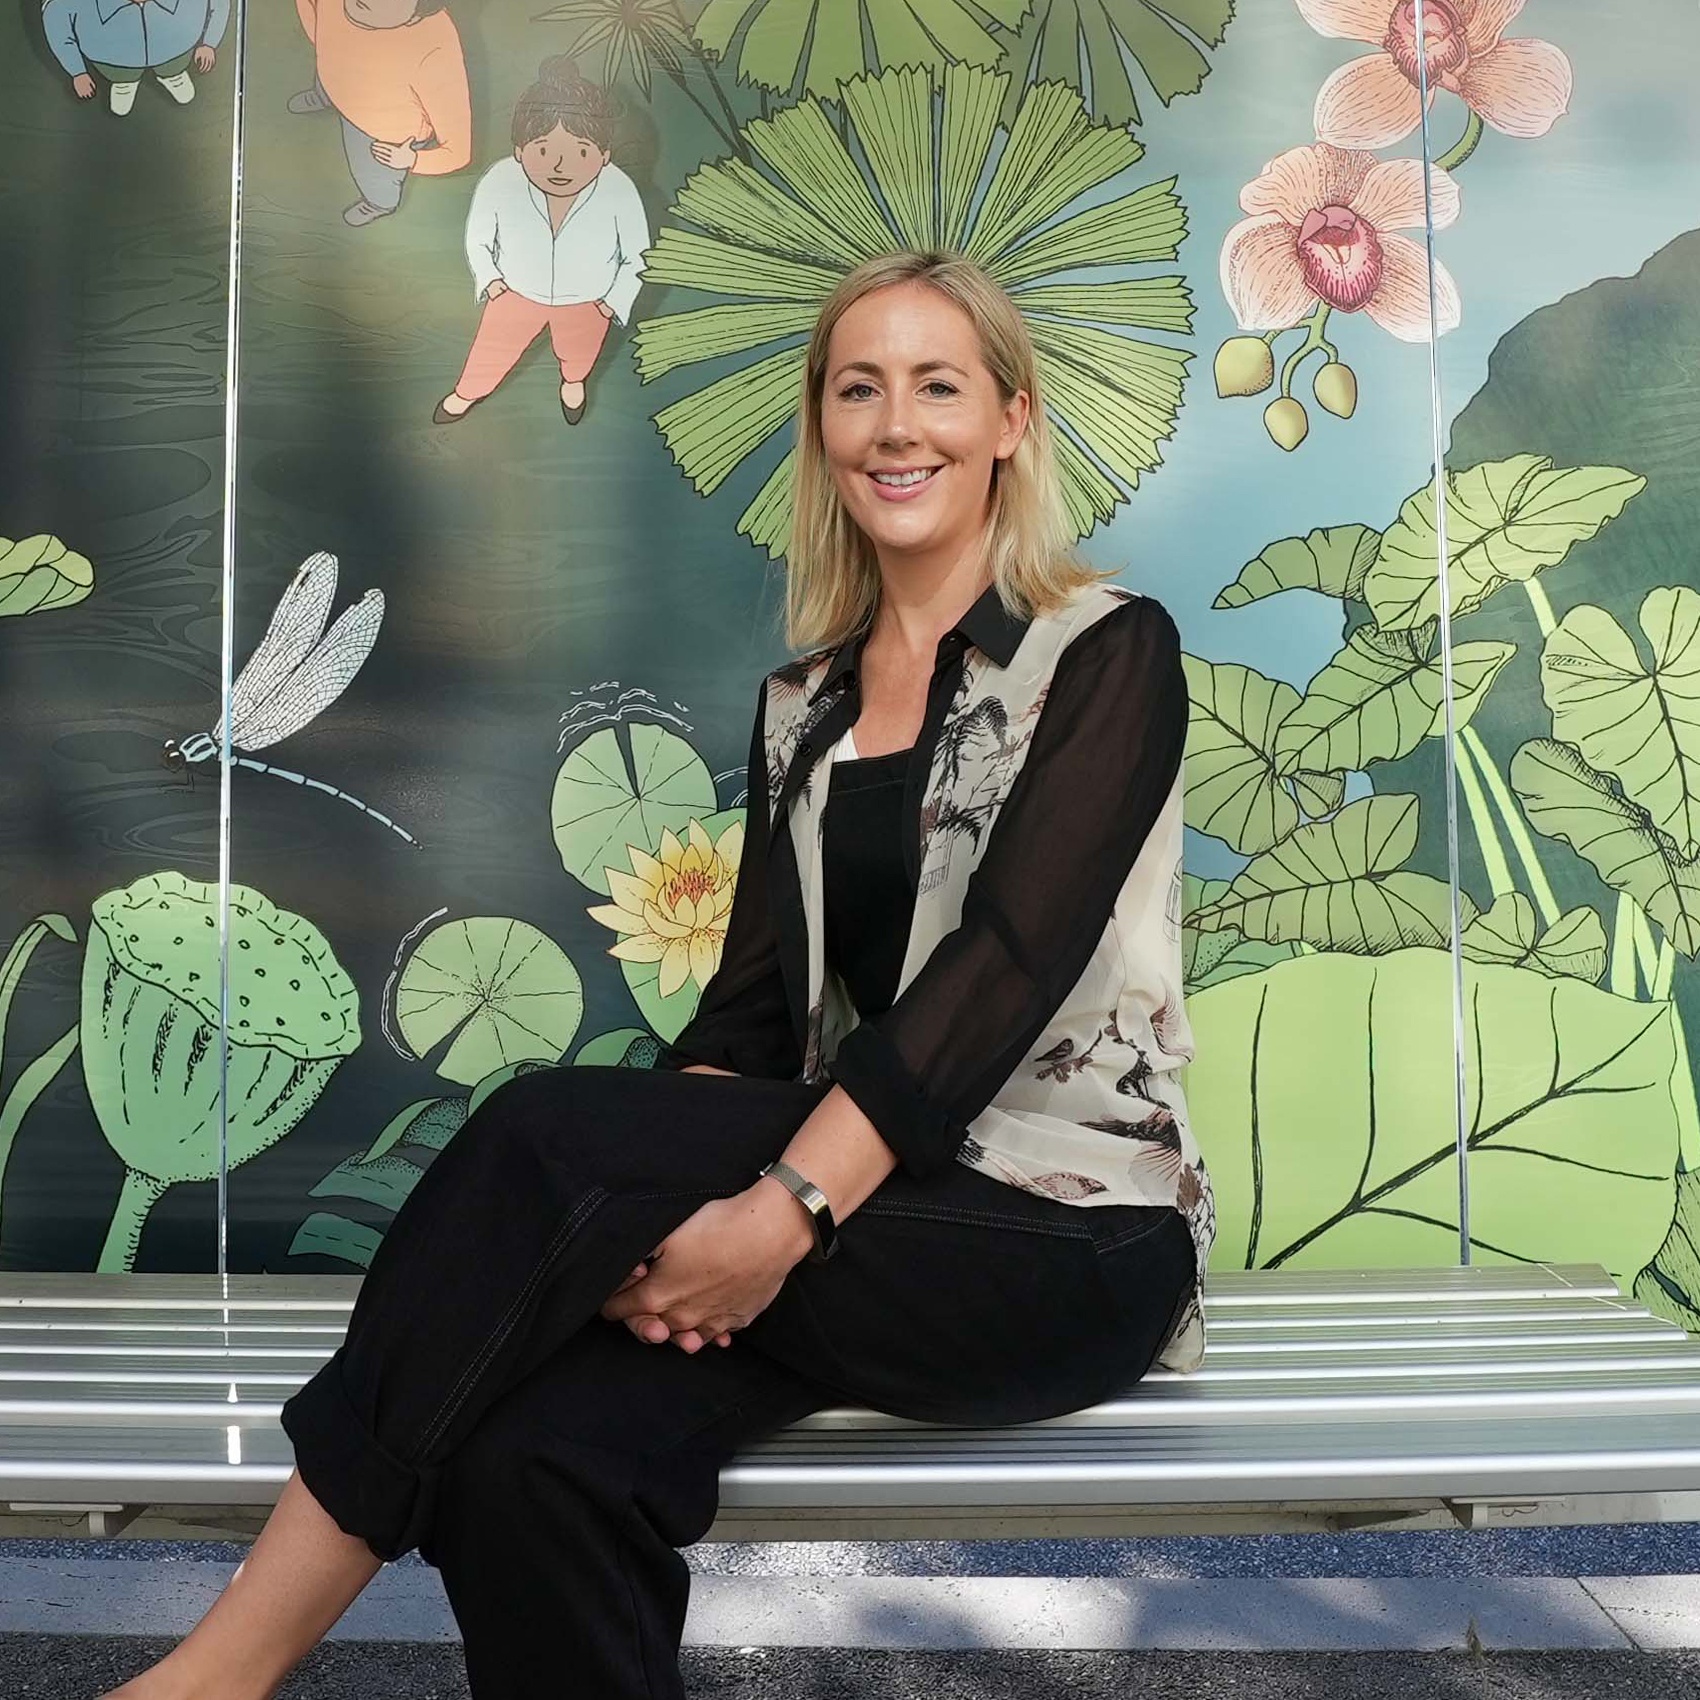 Portrait of a woman sitting on a bench in front of a mural depicting plants and flowers.